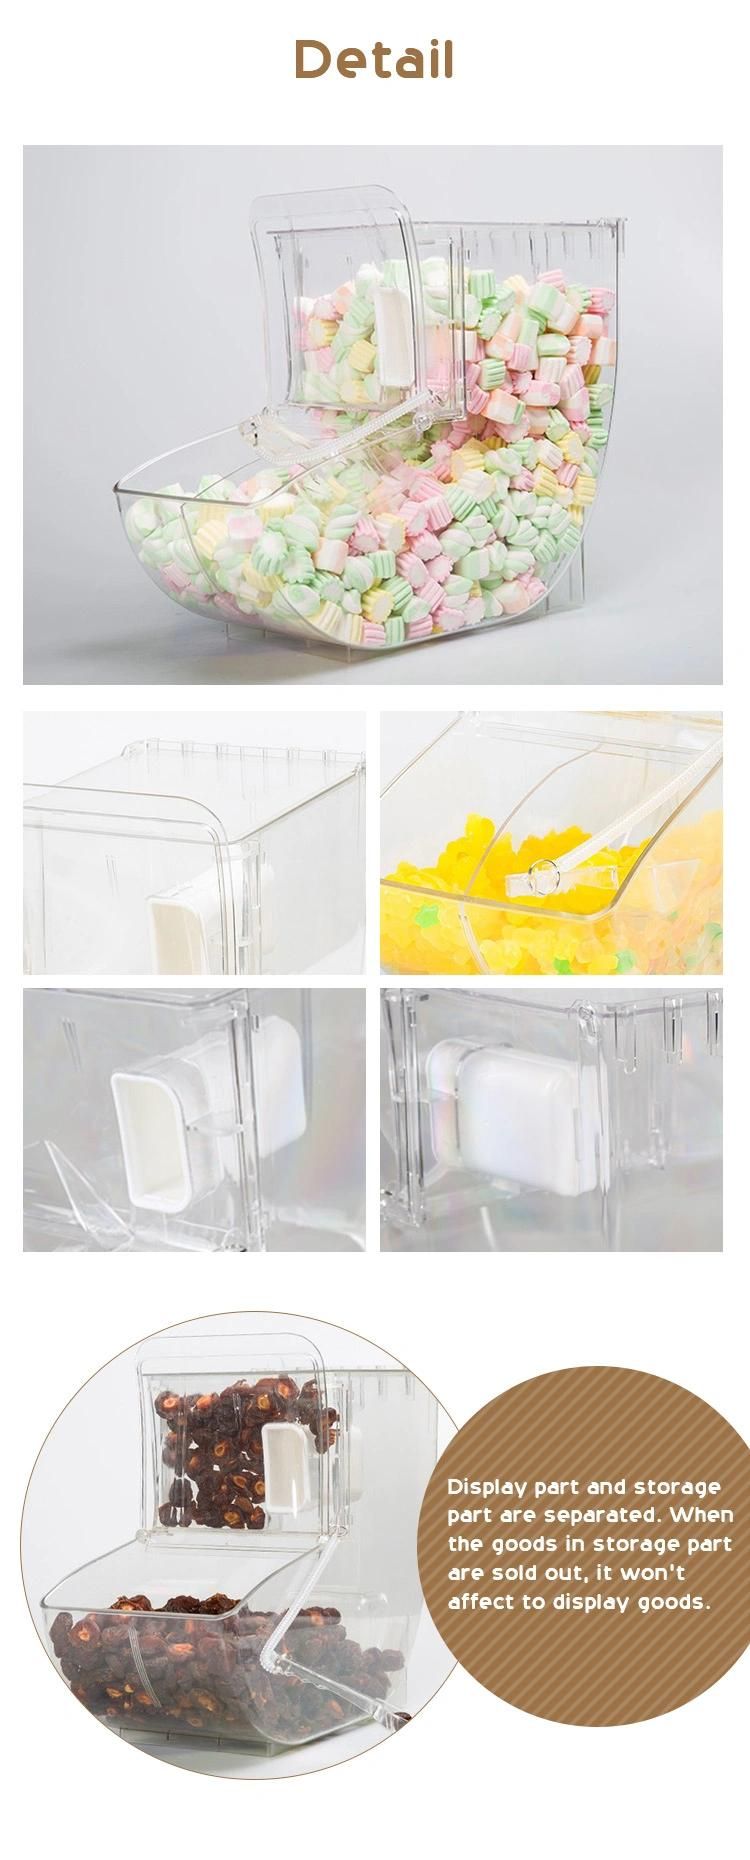 Retail Store Dry Food Gravity Clear Plastic Candy Dispenser Gravity Bulk Feed Dispenser and Bins for Store and Supermarket